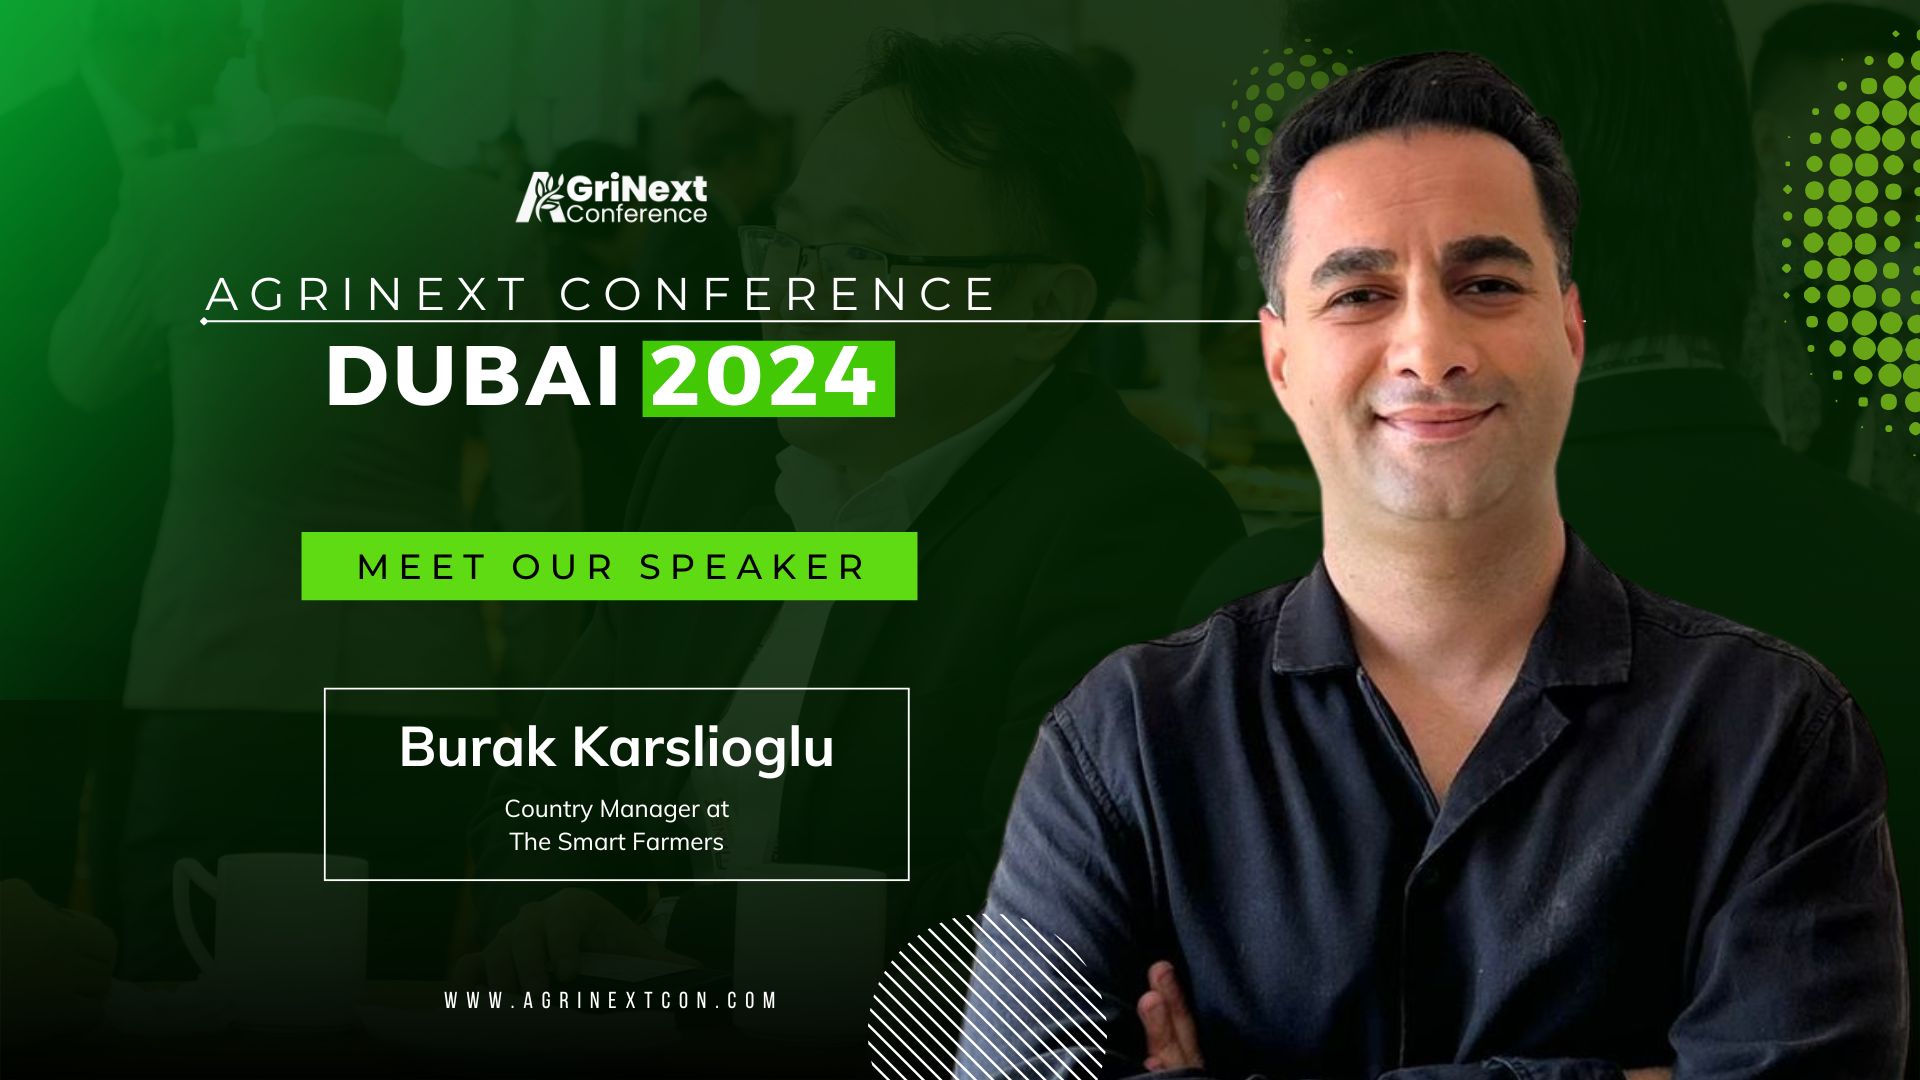 Burak Karslioglu, Country Manager of Smart Farms, to Speak at AgriNext Conference in Dubai